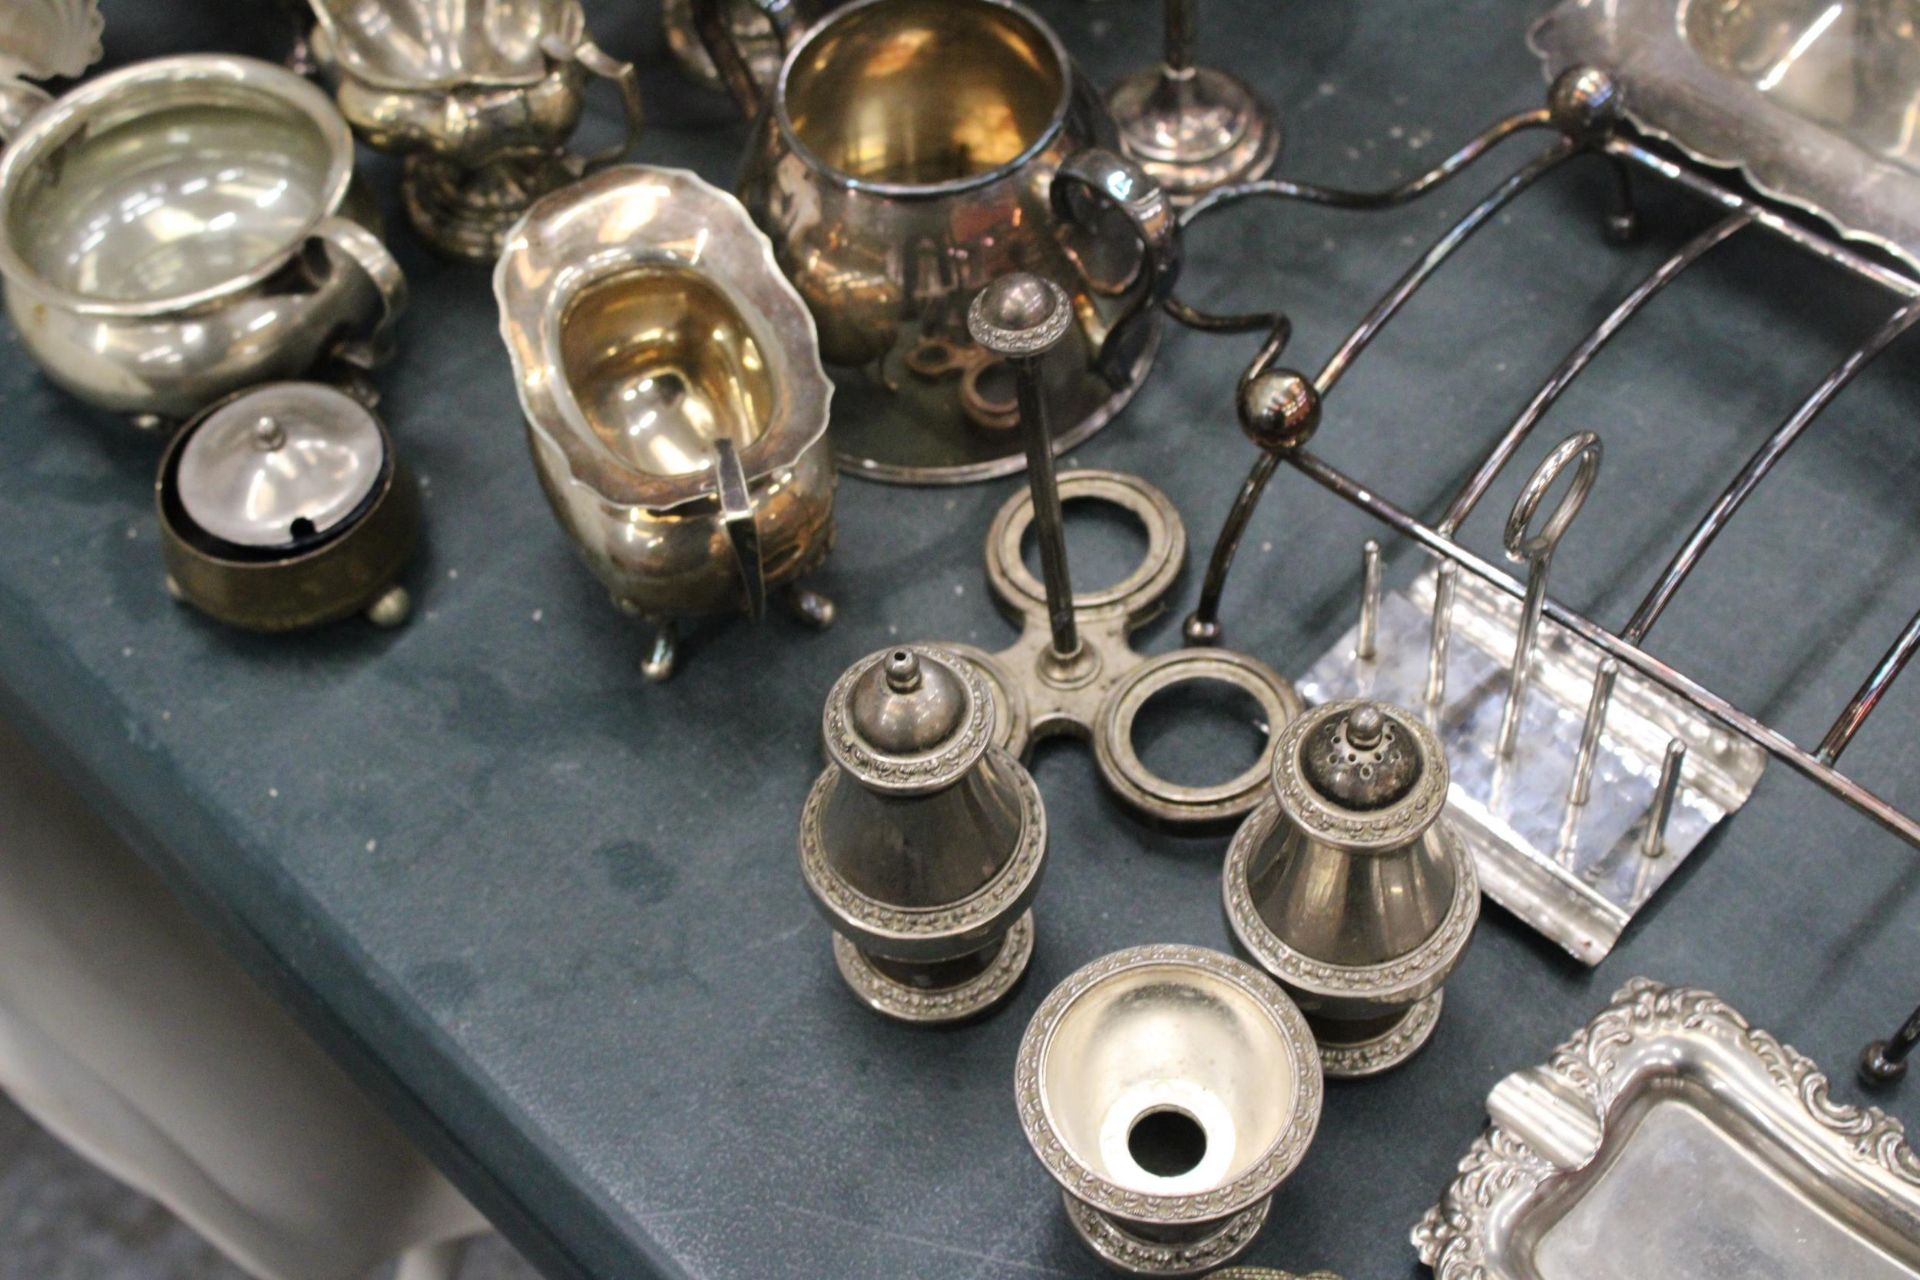 A VERY LARGE QUANTITY OF SILVER PLATED ITEMS TO INCLUDE TEAPOTS, COFFEE POTS, SERVING DISHES, - Image 6 of 6